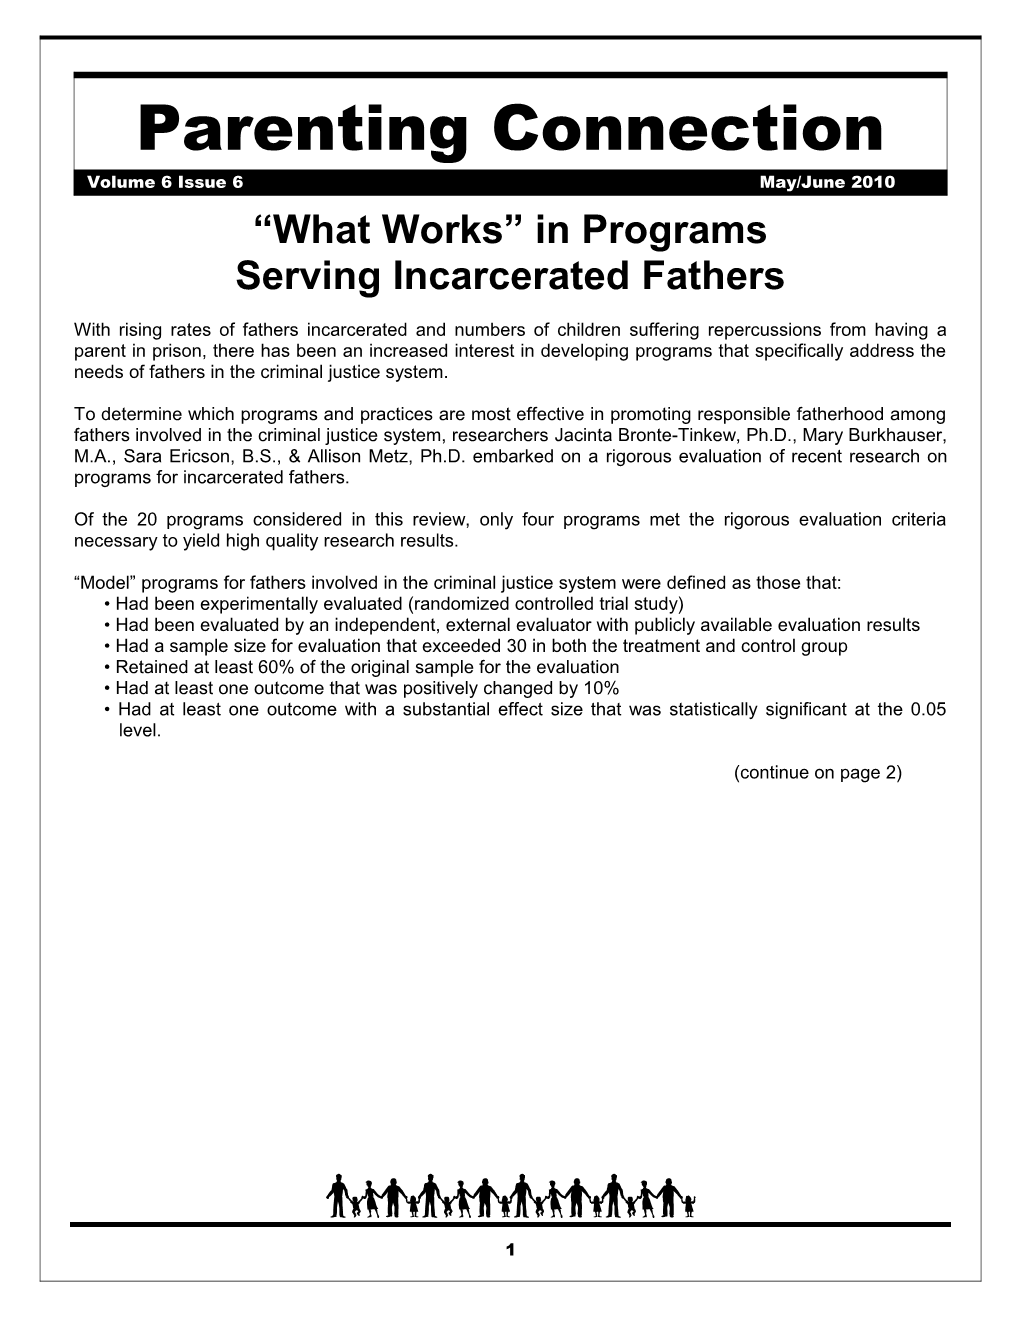 What Works in Programs